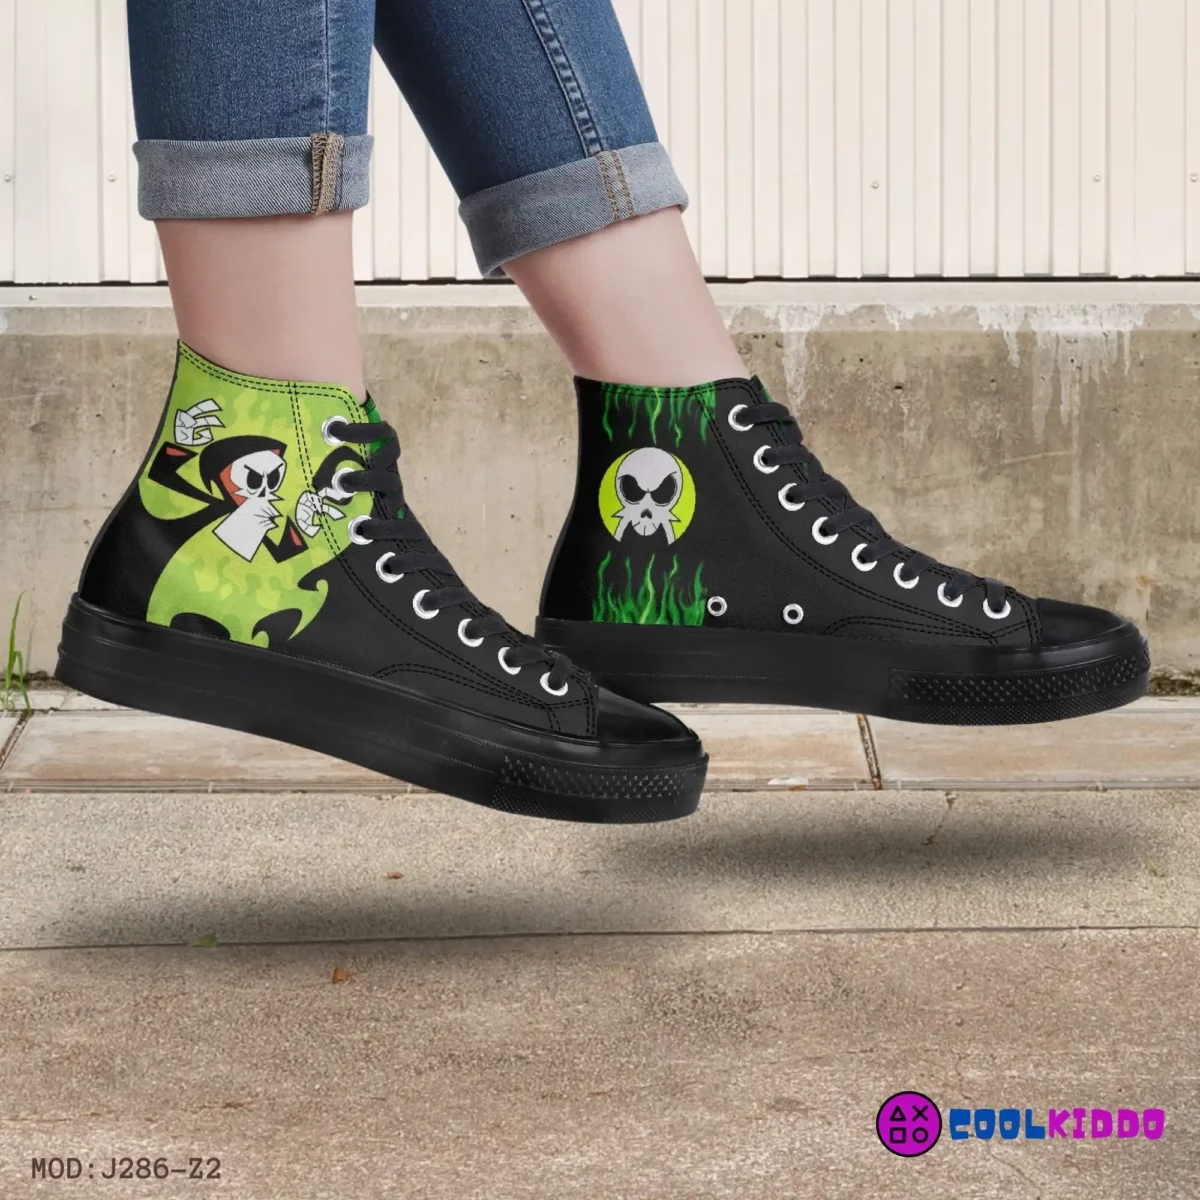 Grim Black and Green High-Top Canvas Shoes | From The Grim Adventures of Billy and Mandy | Adult/Youth – Black Sole Grim Sneakers Cool Kiddo 24